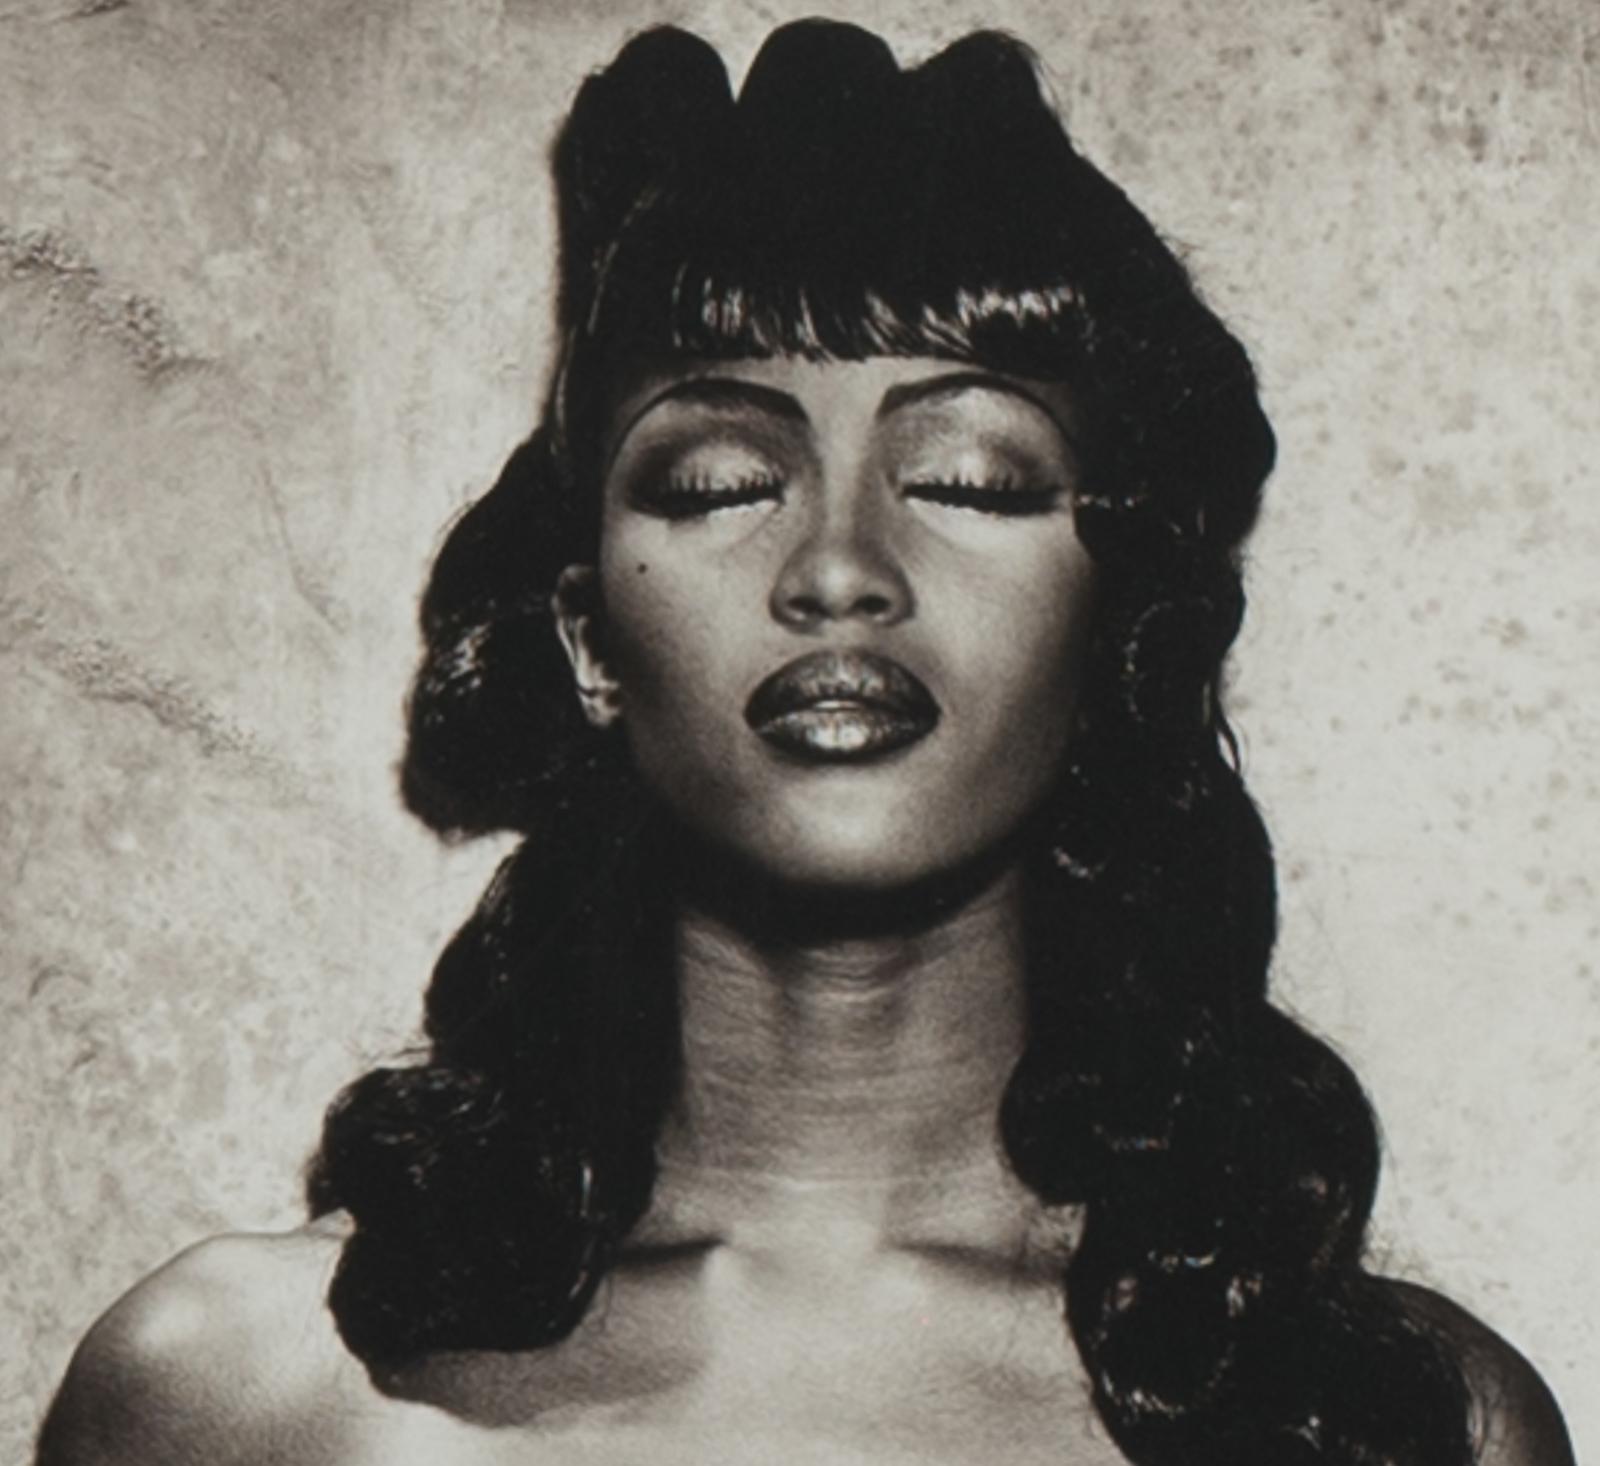 French Original Photograph of Naomi Campbell by Karl Lagerfeld